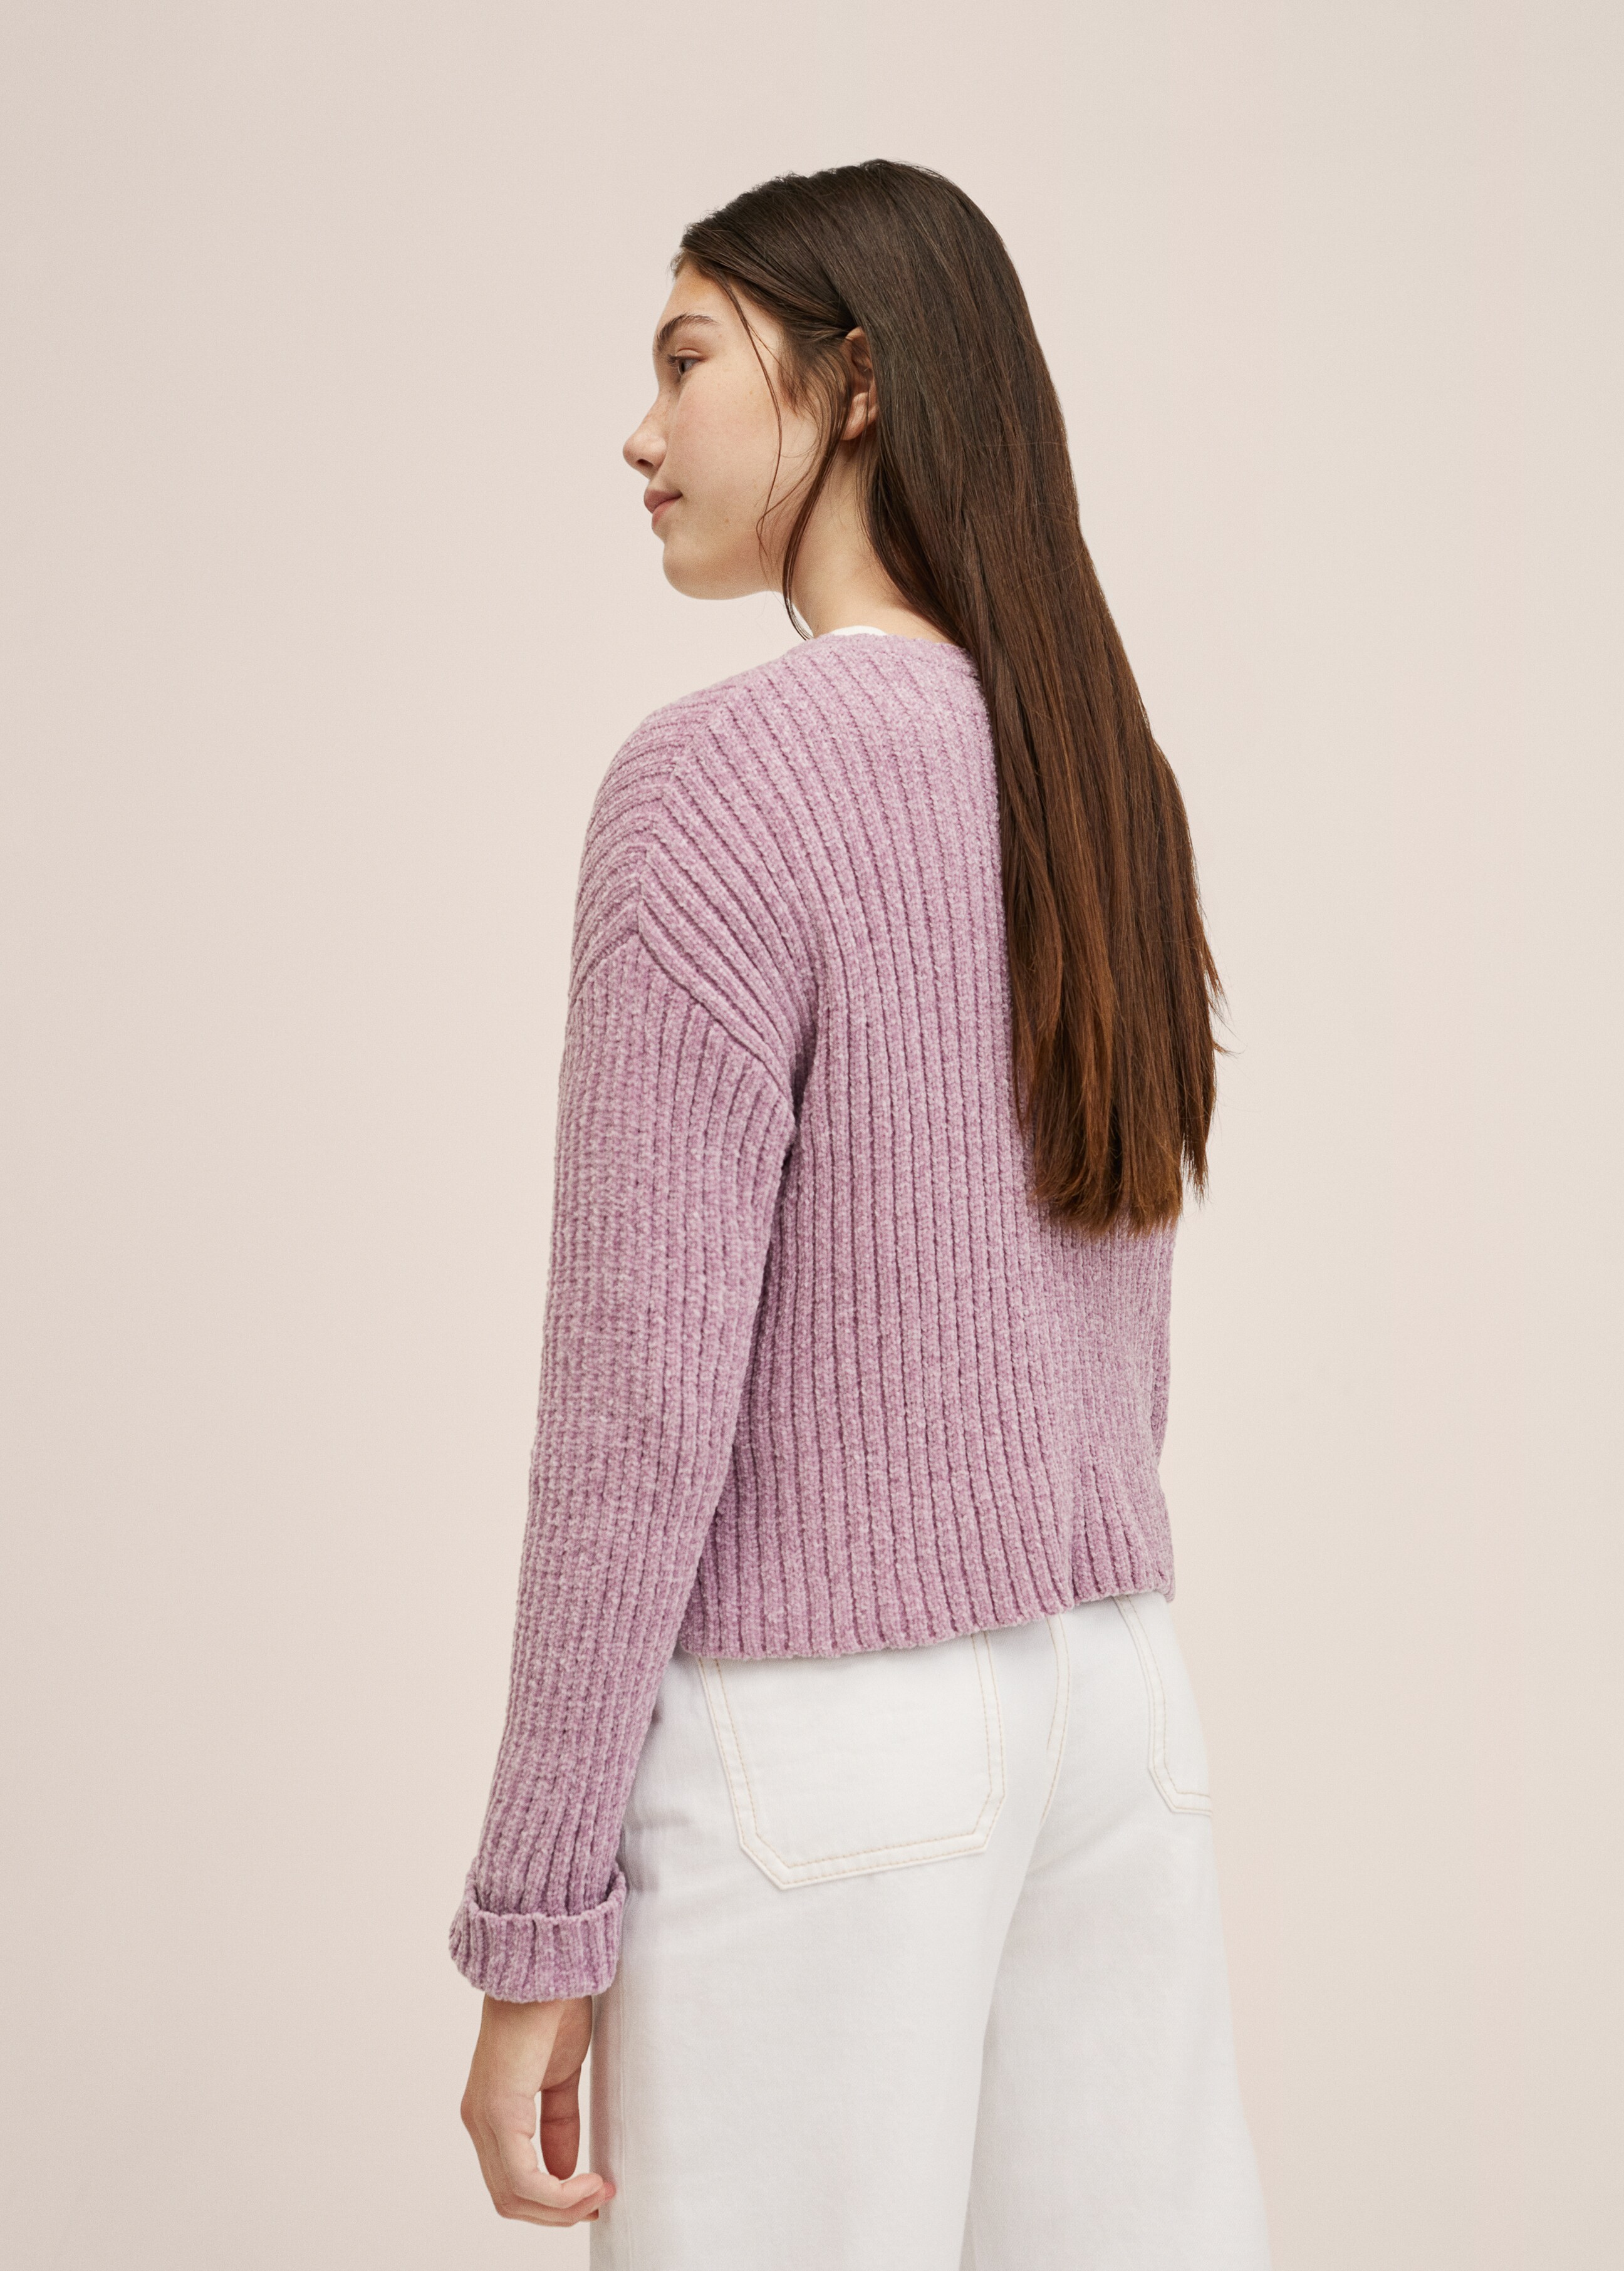 Chenille knit sweater - Reverse of the article